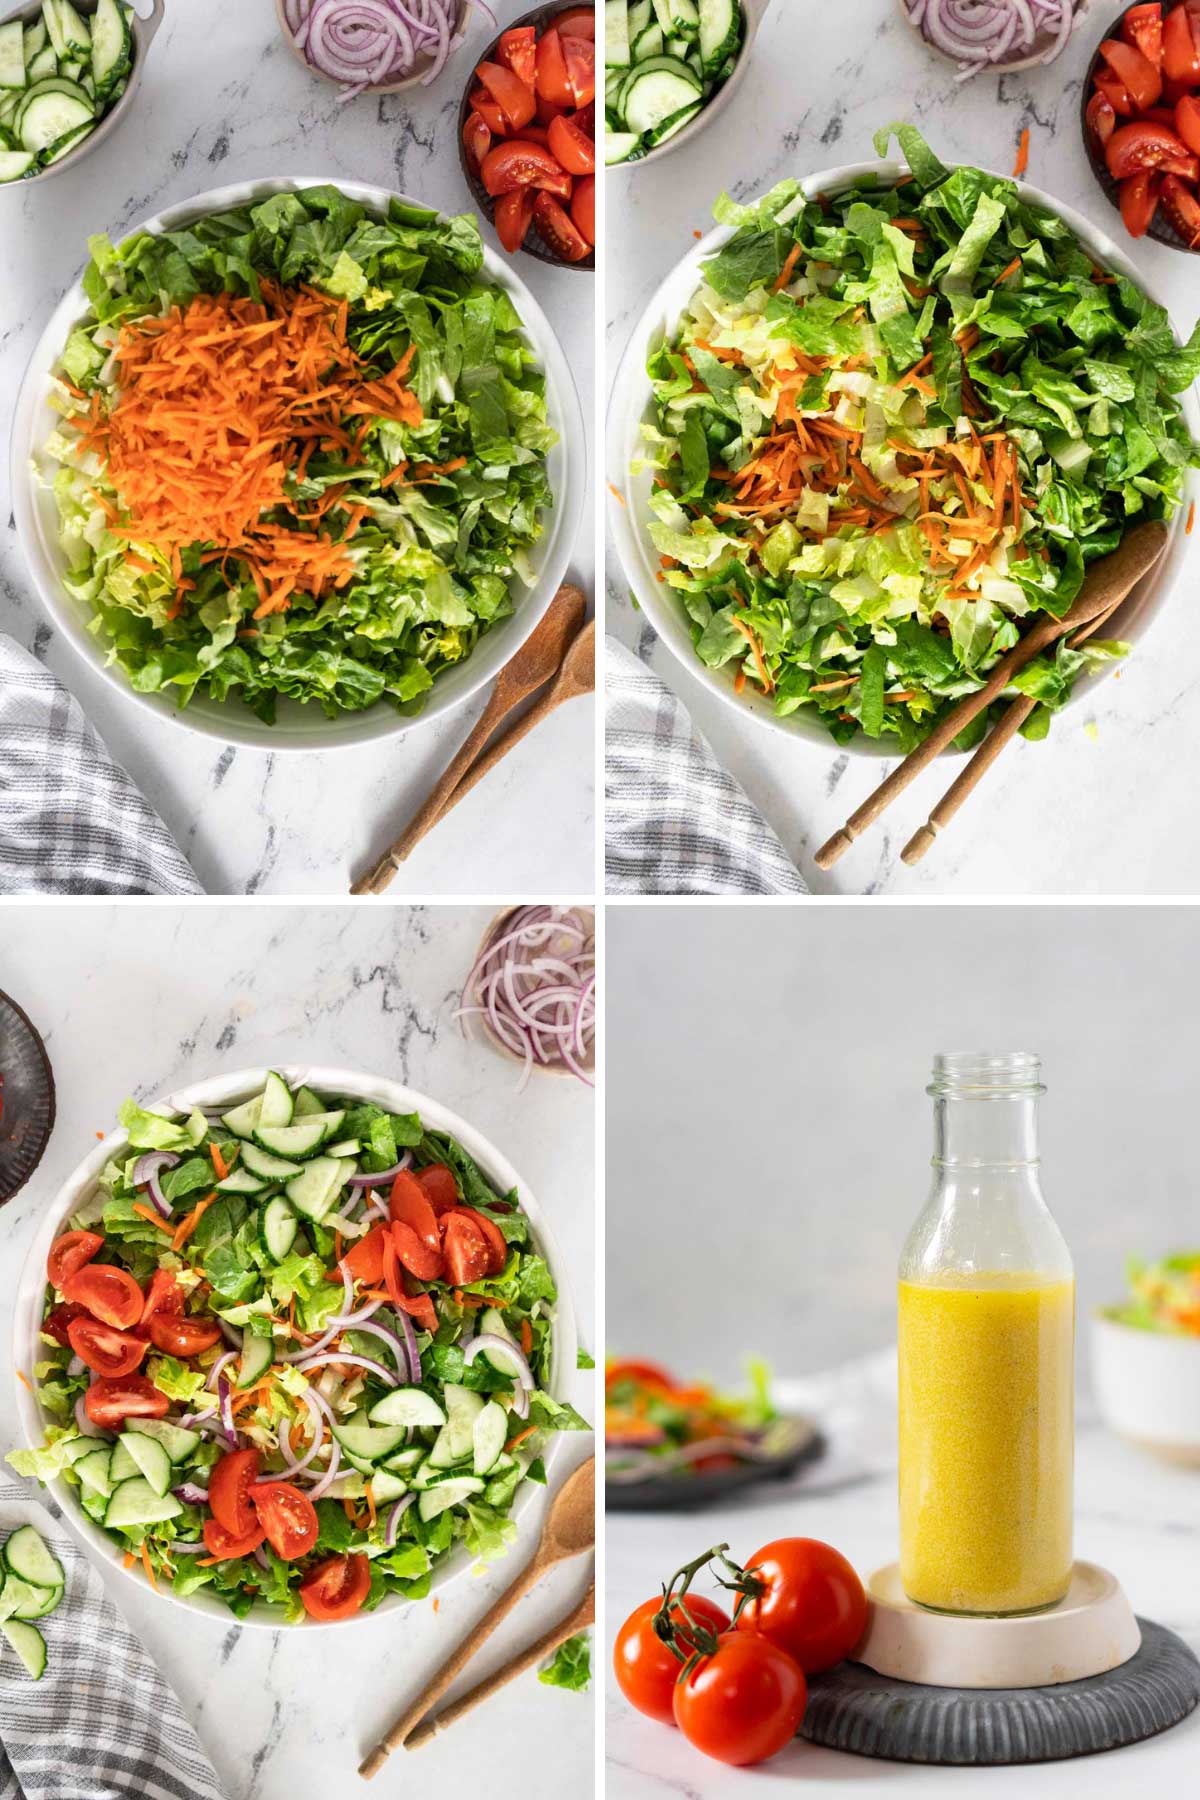 Assembling the salad and the yellow salad dressing in a bottle.